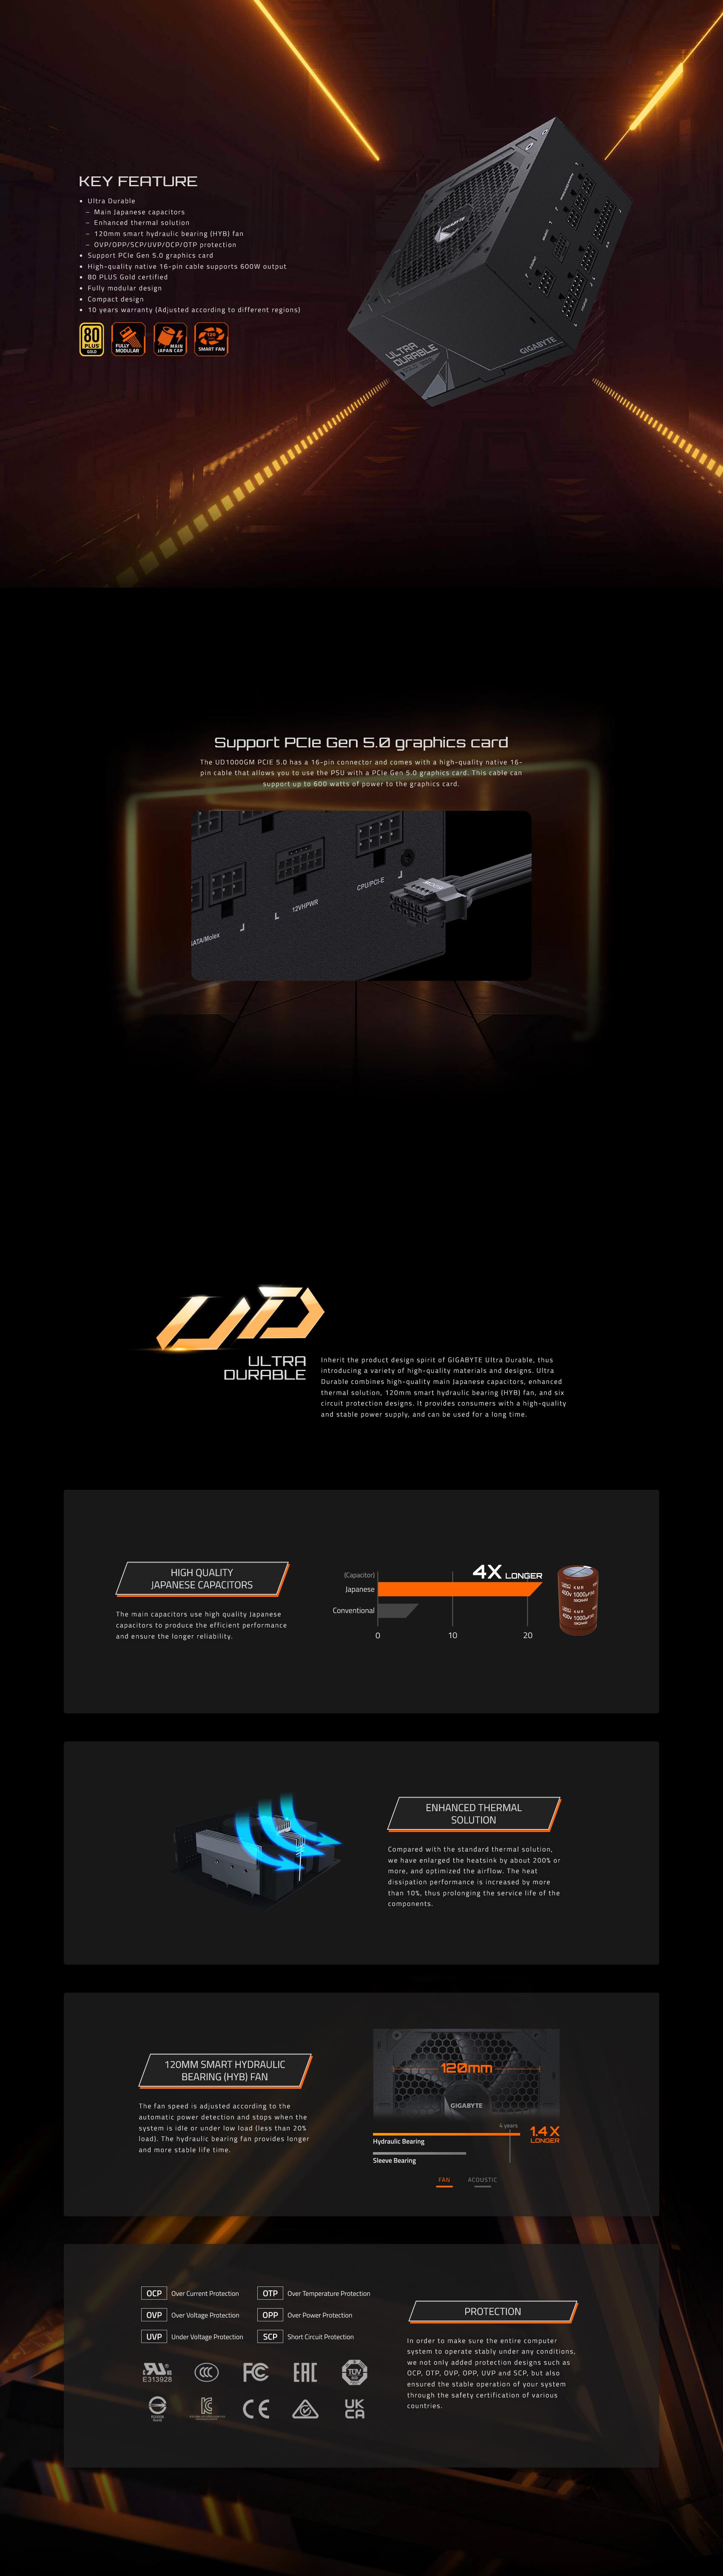 A large marketing image providing additional information about the product Gigabyte UD1000GM PG5 1000W Gold PCIe 5.0 ATX Modular PSU - Additional alt info not provided